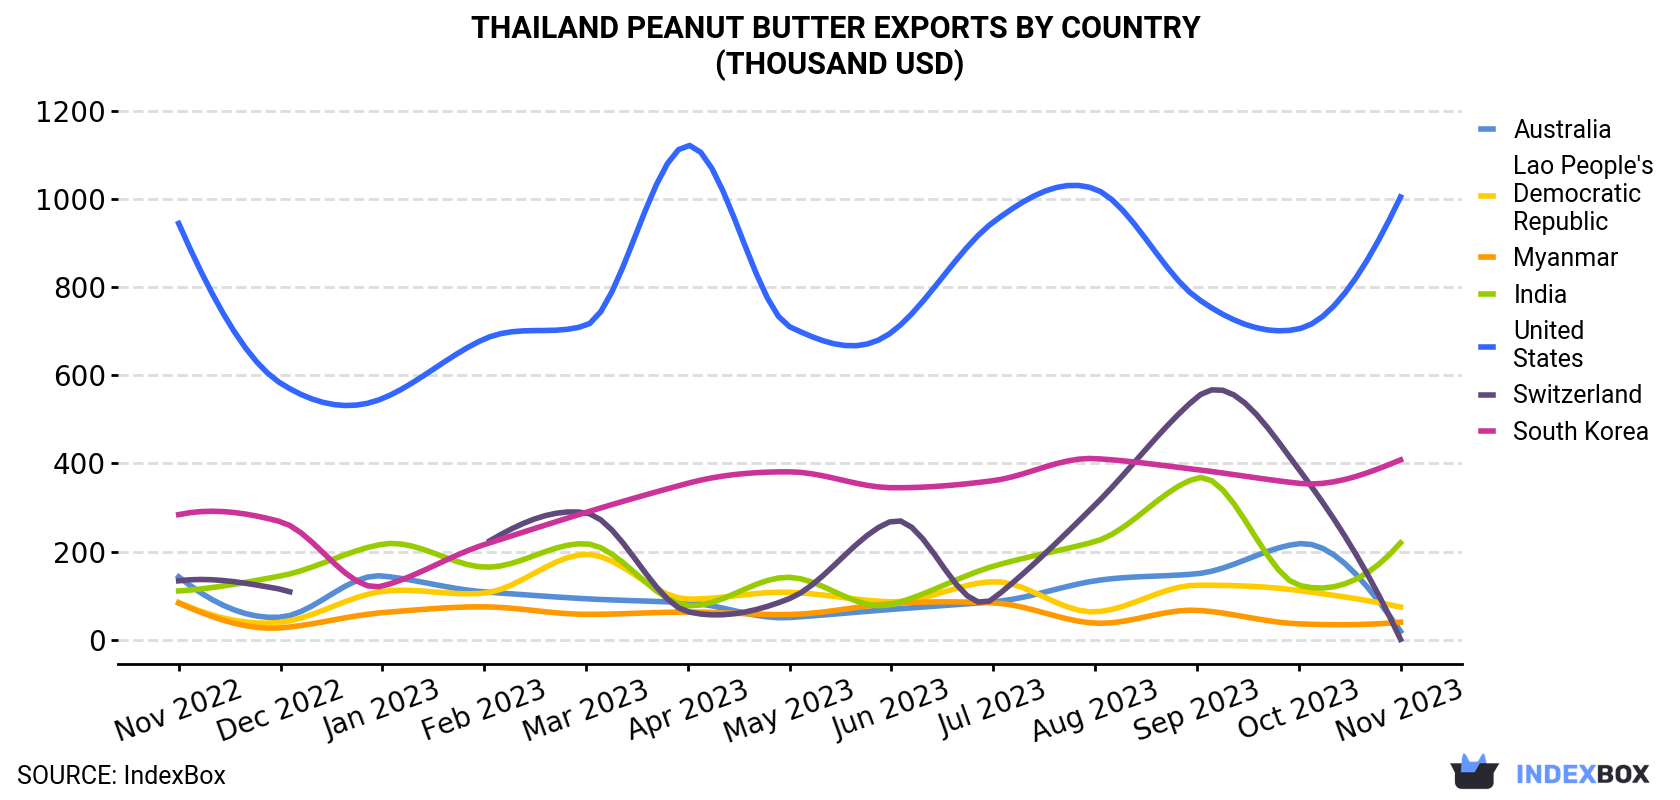 Thailand Peanut Butter Exports By Country (Thousand USD)